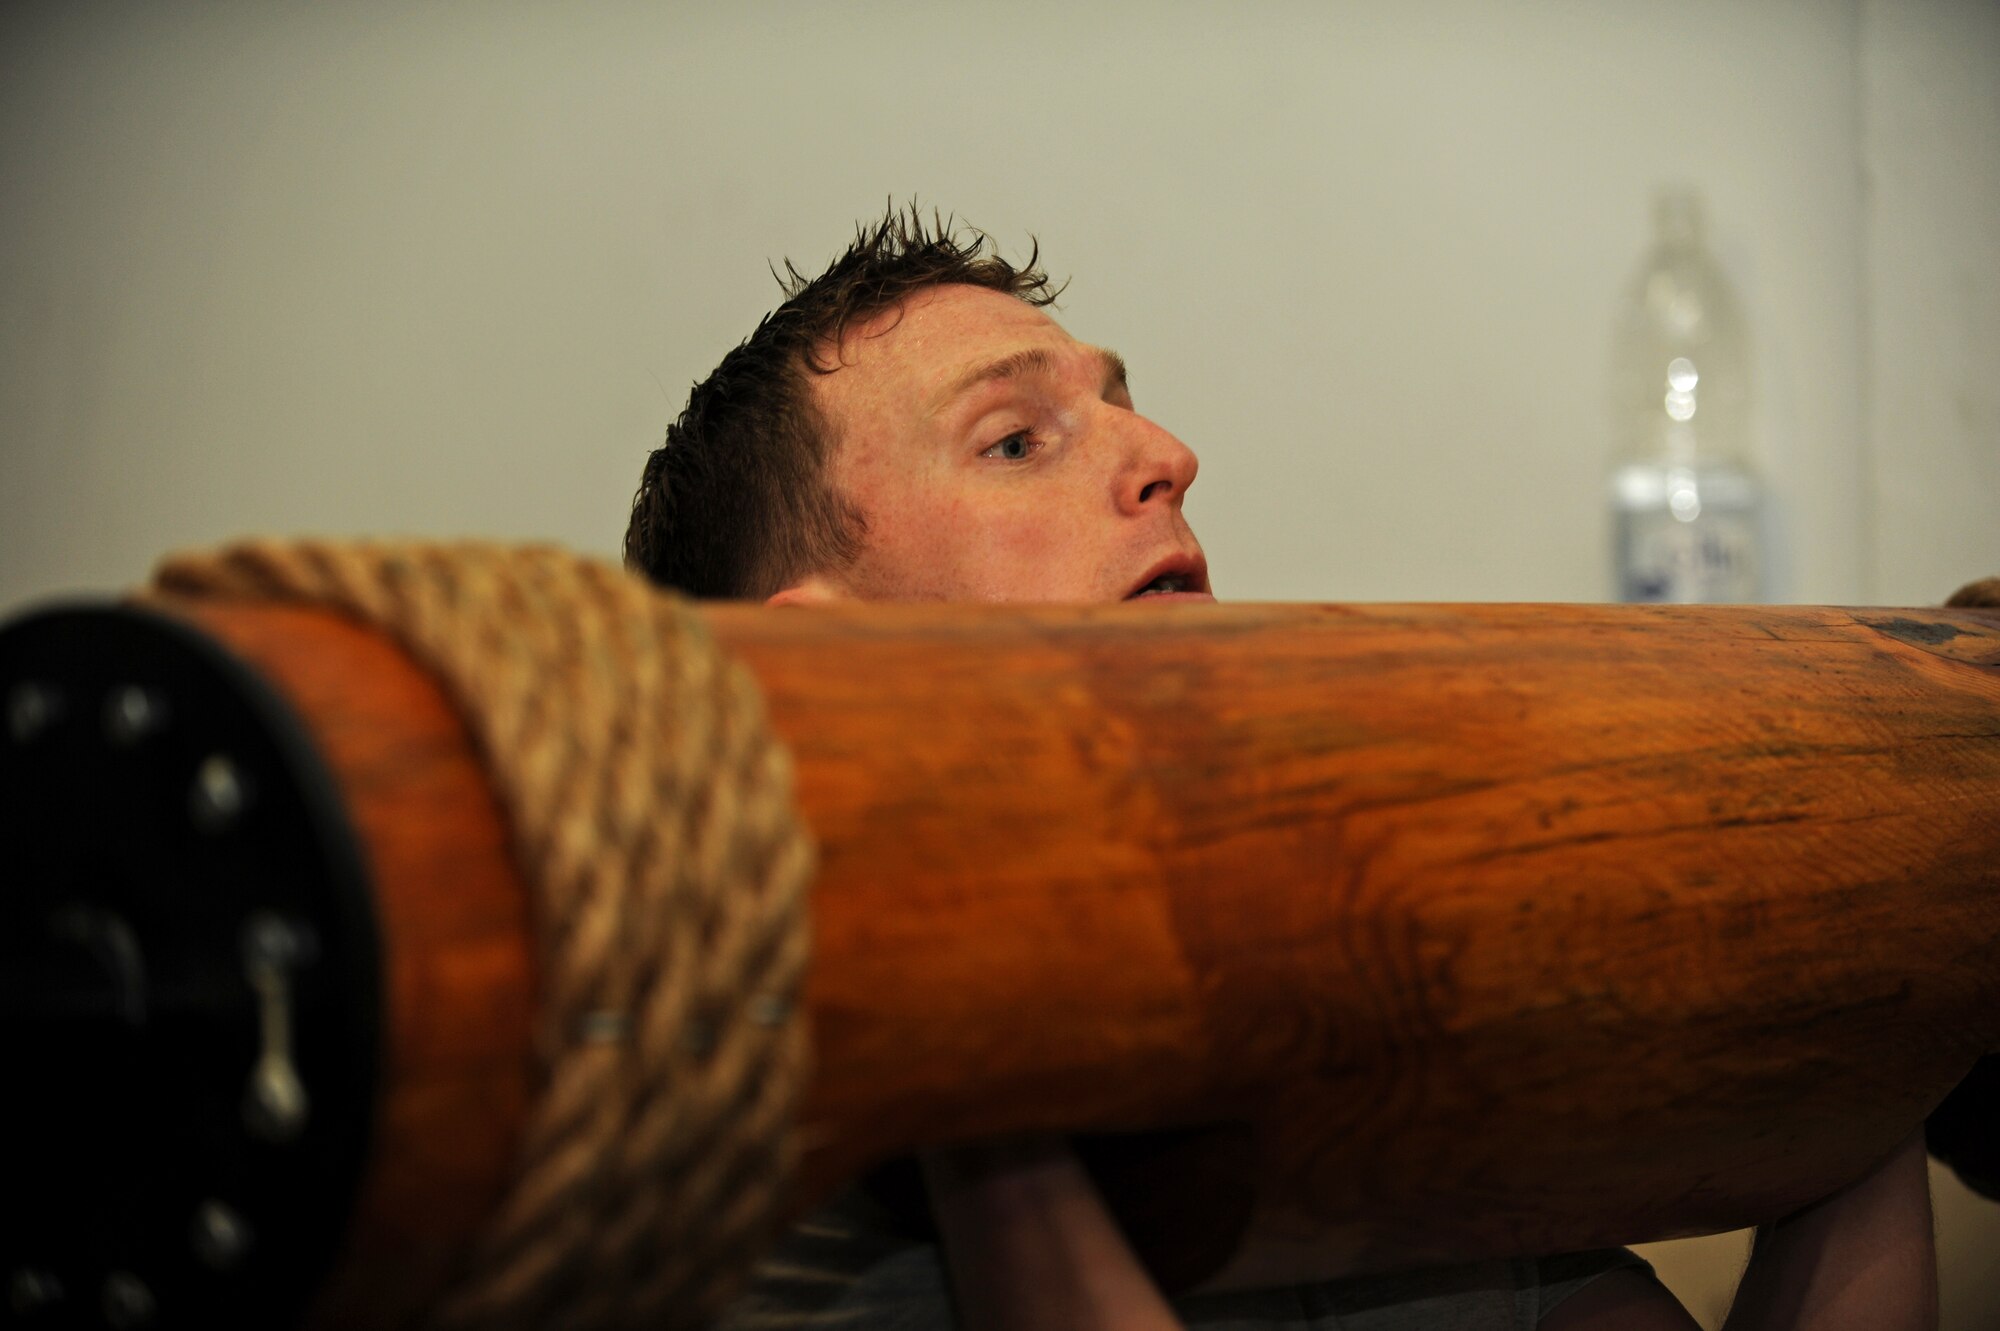 SPANGDAHLEM AIR BASE, Germany – Staff Sgt. Eric Sims, 52nd Component Maintenance Squadron aircraft fuels systems repair craftsman, lifts a weighted log during fitness training at the combat fitness facility here Nov. 30. Air Force Fitness Assessments continue throughout the winter season; however, the 1.5 mile run portion will consist of 22 laps inside the Skelton Memorial Fitness Center gymnasium on days when the temperature falls below 20 degrees Fahrenheit. (U.S. Air Force photo/Airman 1st Class Matthew B. Fredericks)